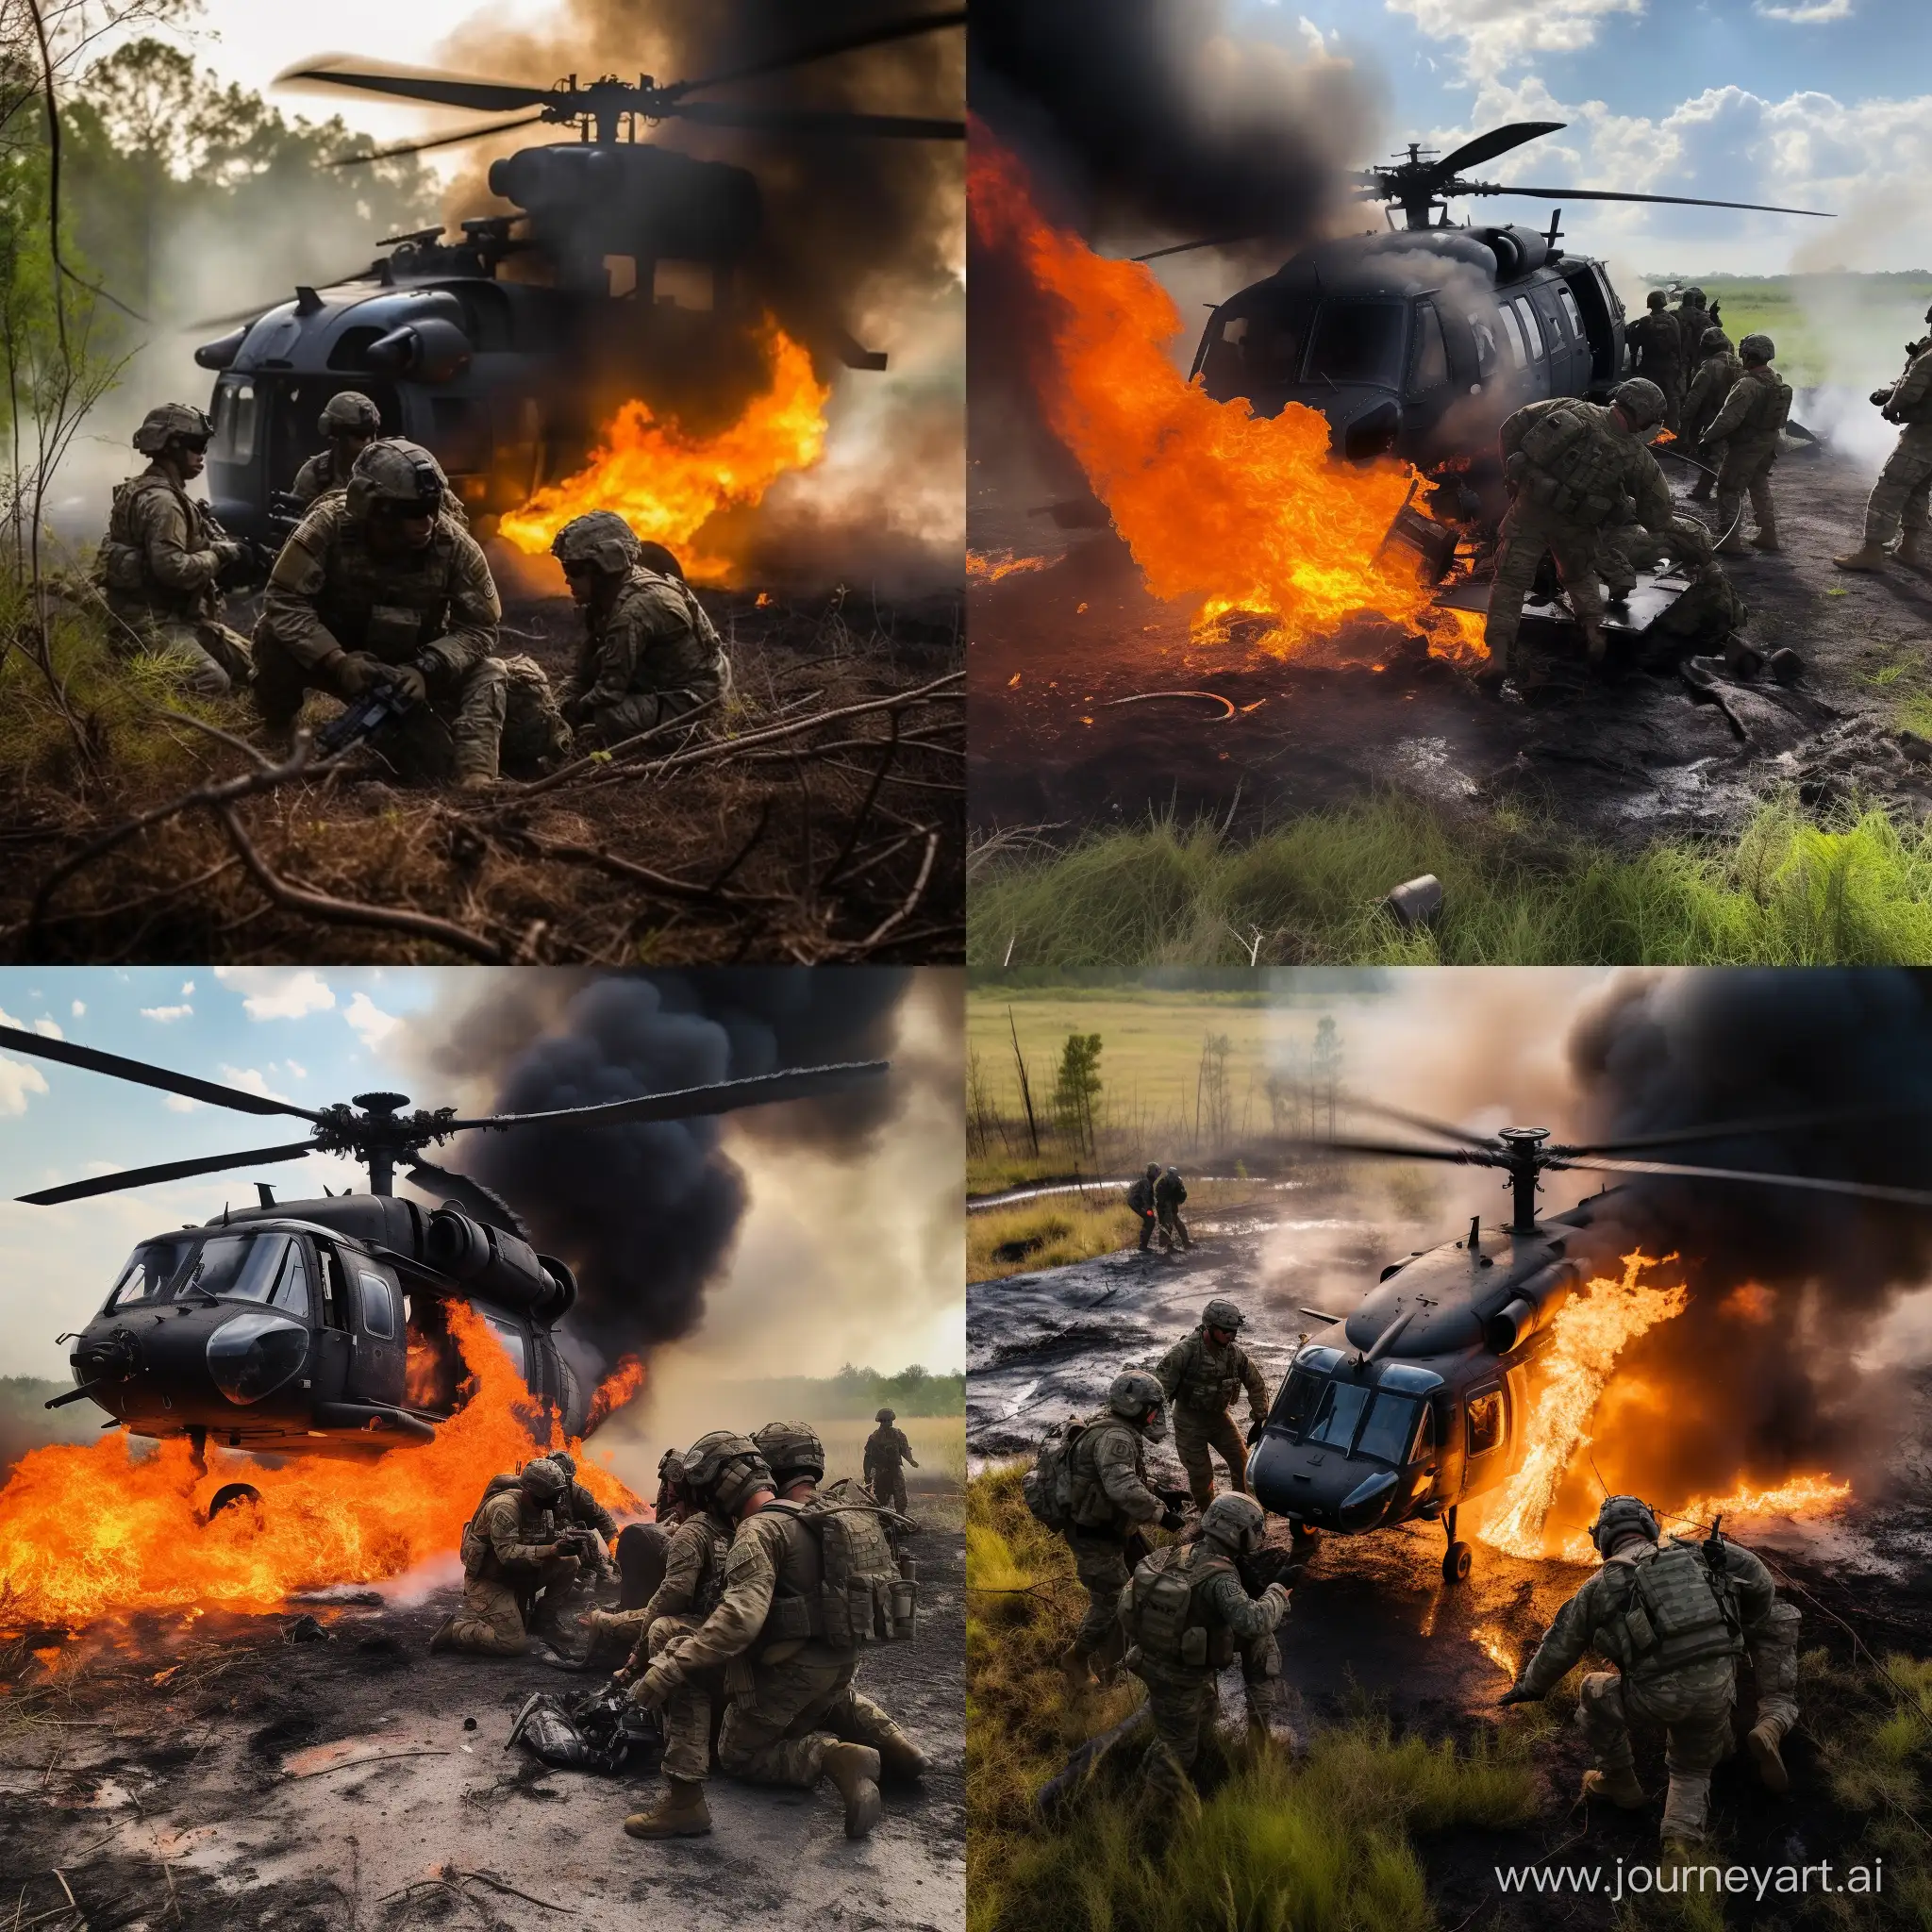 Heroic-US-Army-Soldiers-Rescuing-Pilot-from-Crashed-UH60